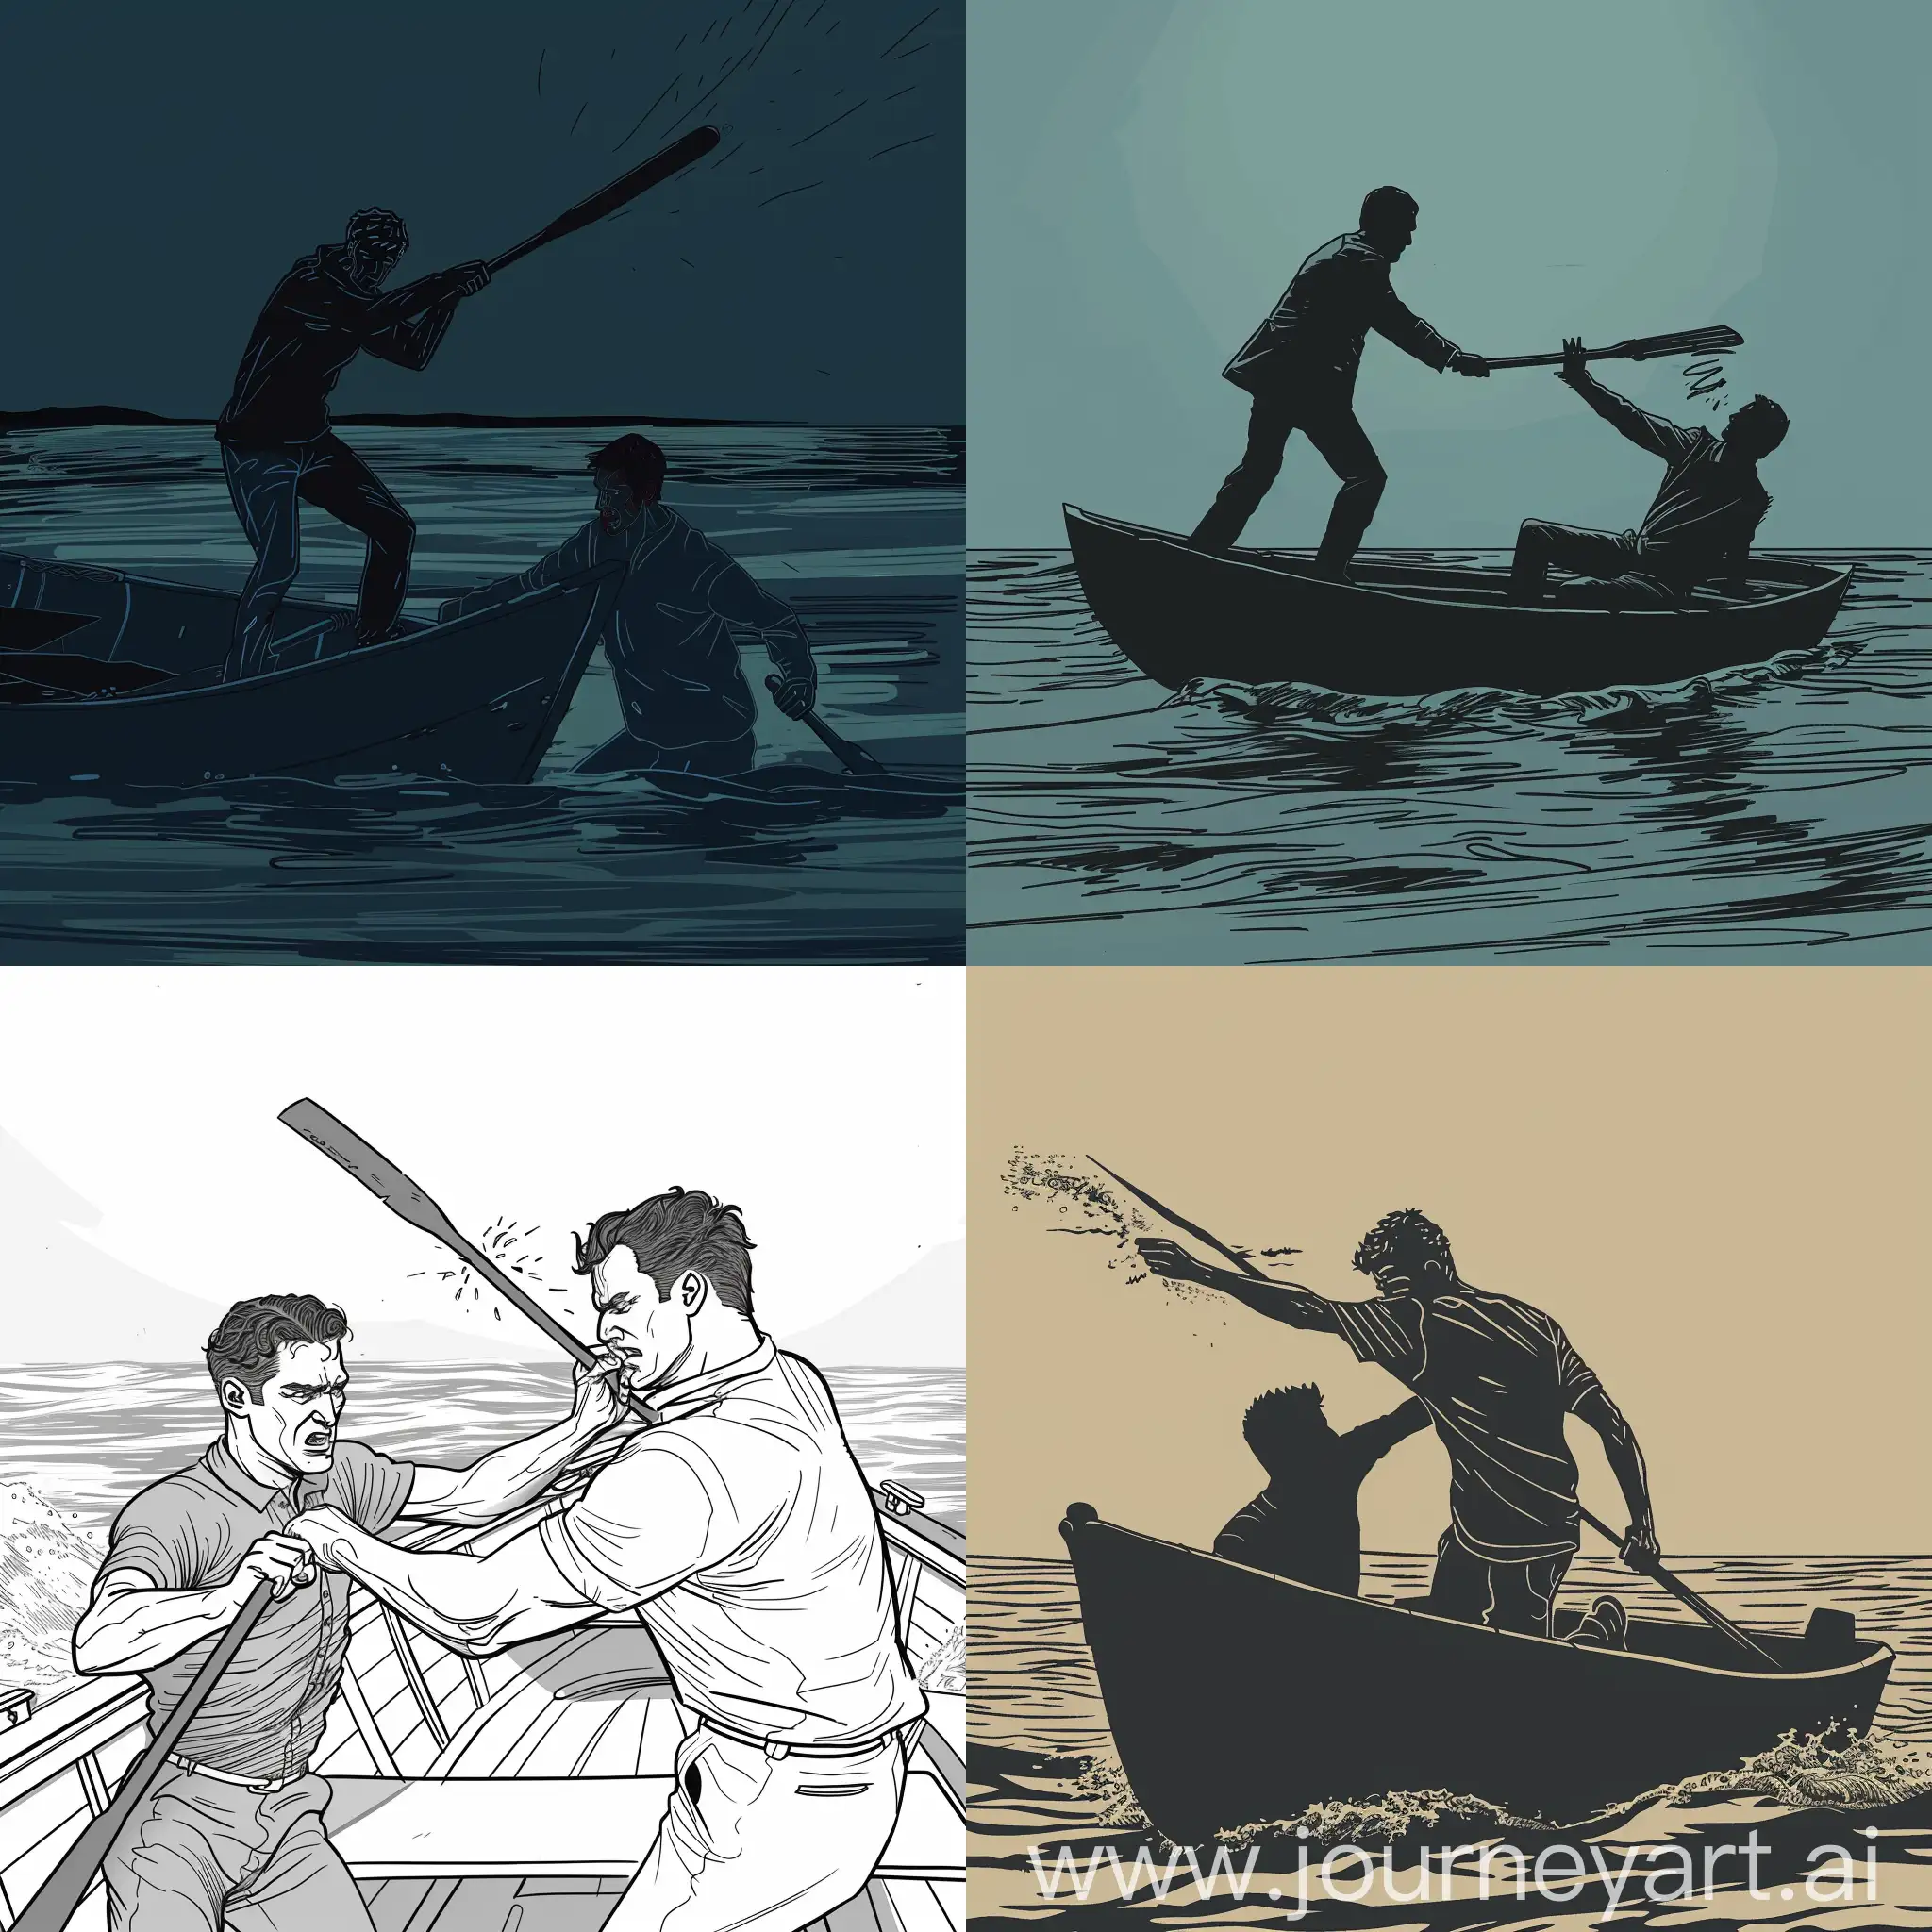 Violent-Confrontation-at-Sea-Man-Striking-Another-with-Boat-Paddle